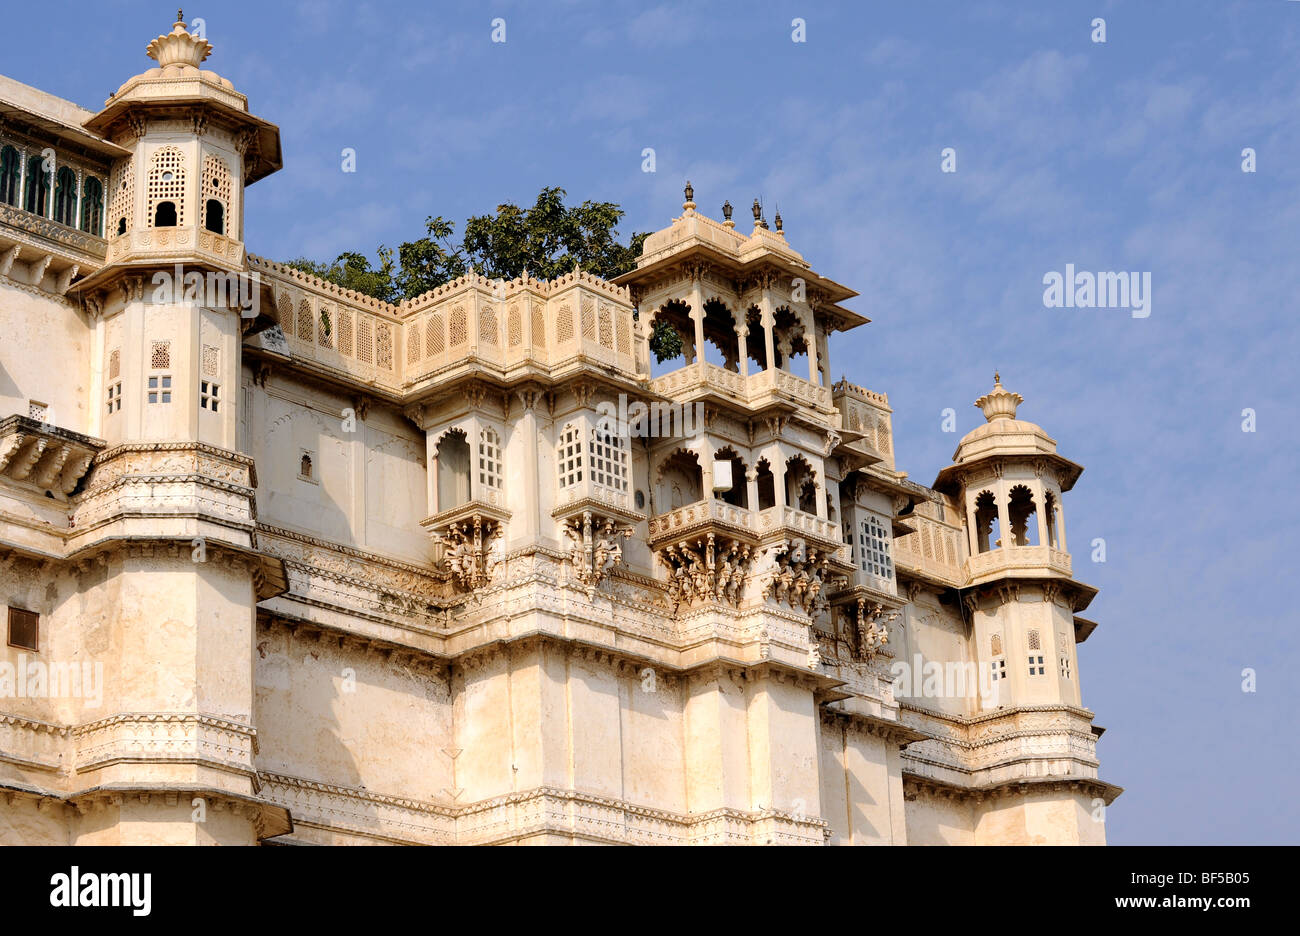 City palace of Udaipur, exterior, detail, Udaipur, Rajasthan, North India, India, South Asia, Asia Stock Photo